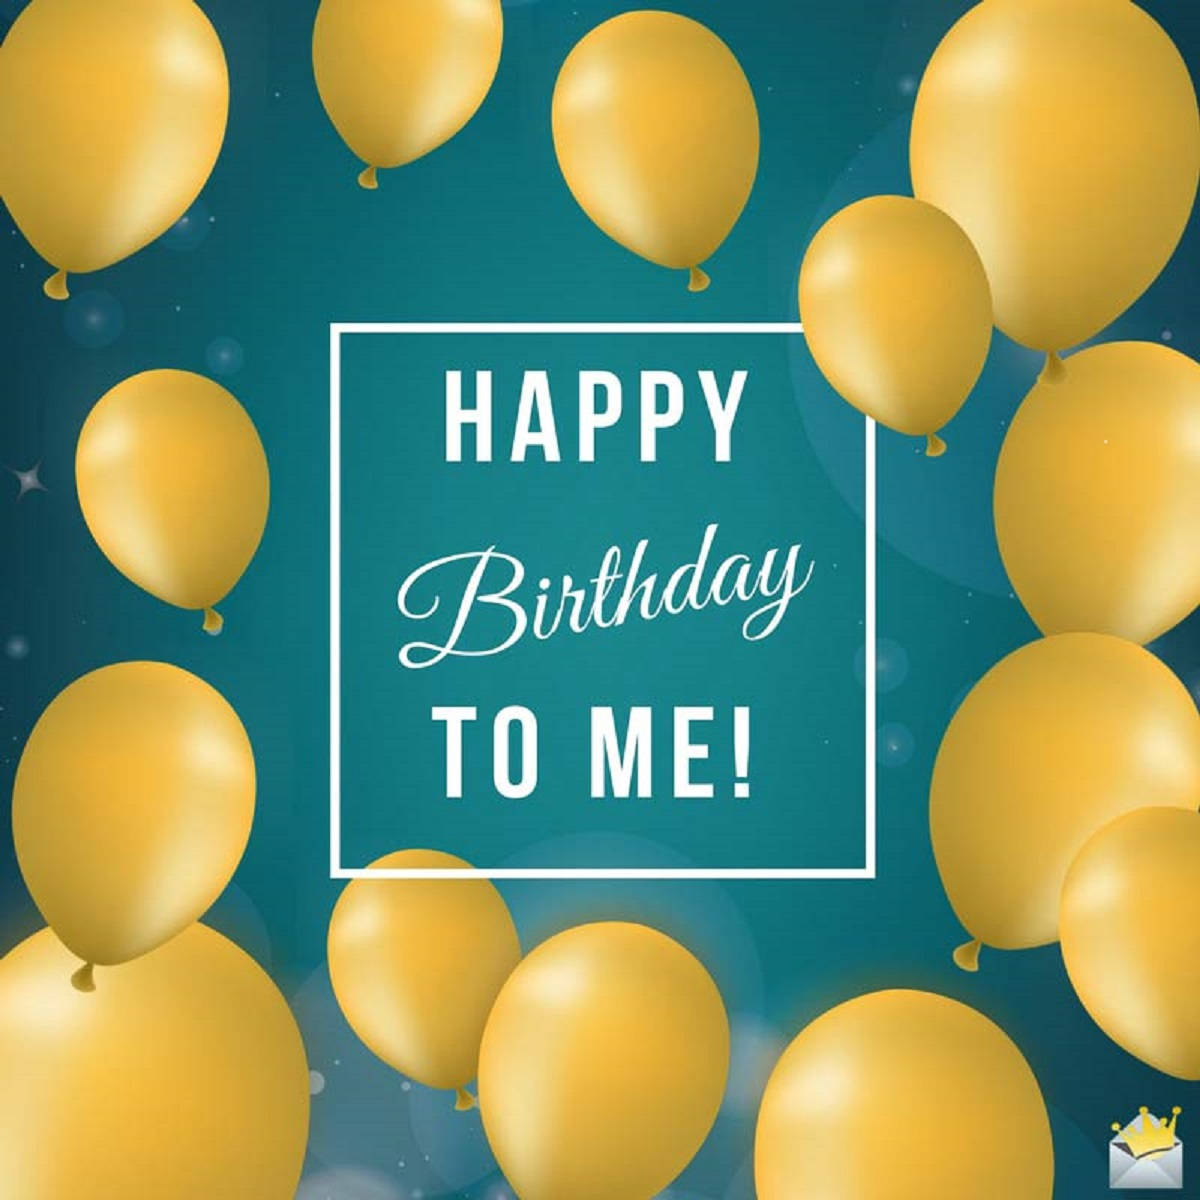 Happy Birthday To Me With Yellow Balloons Wallpaper